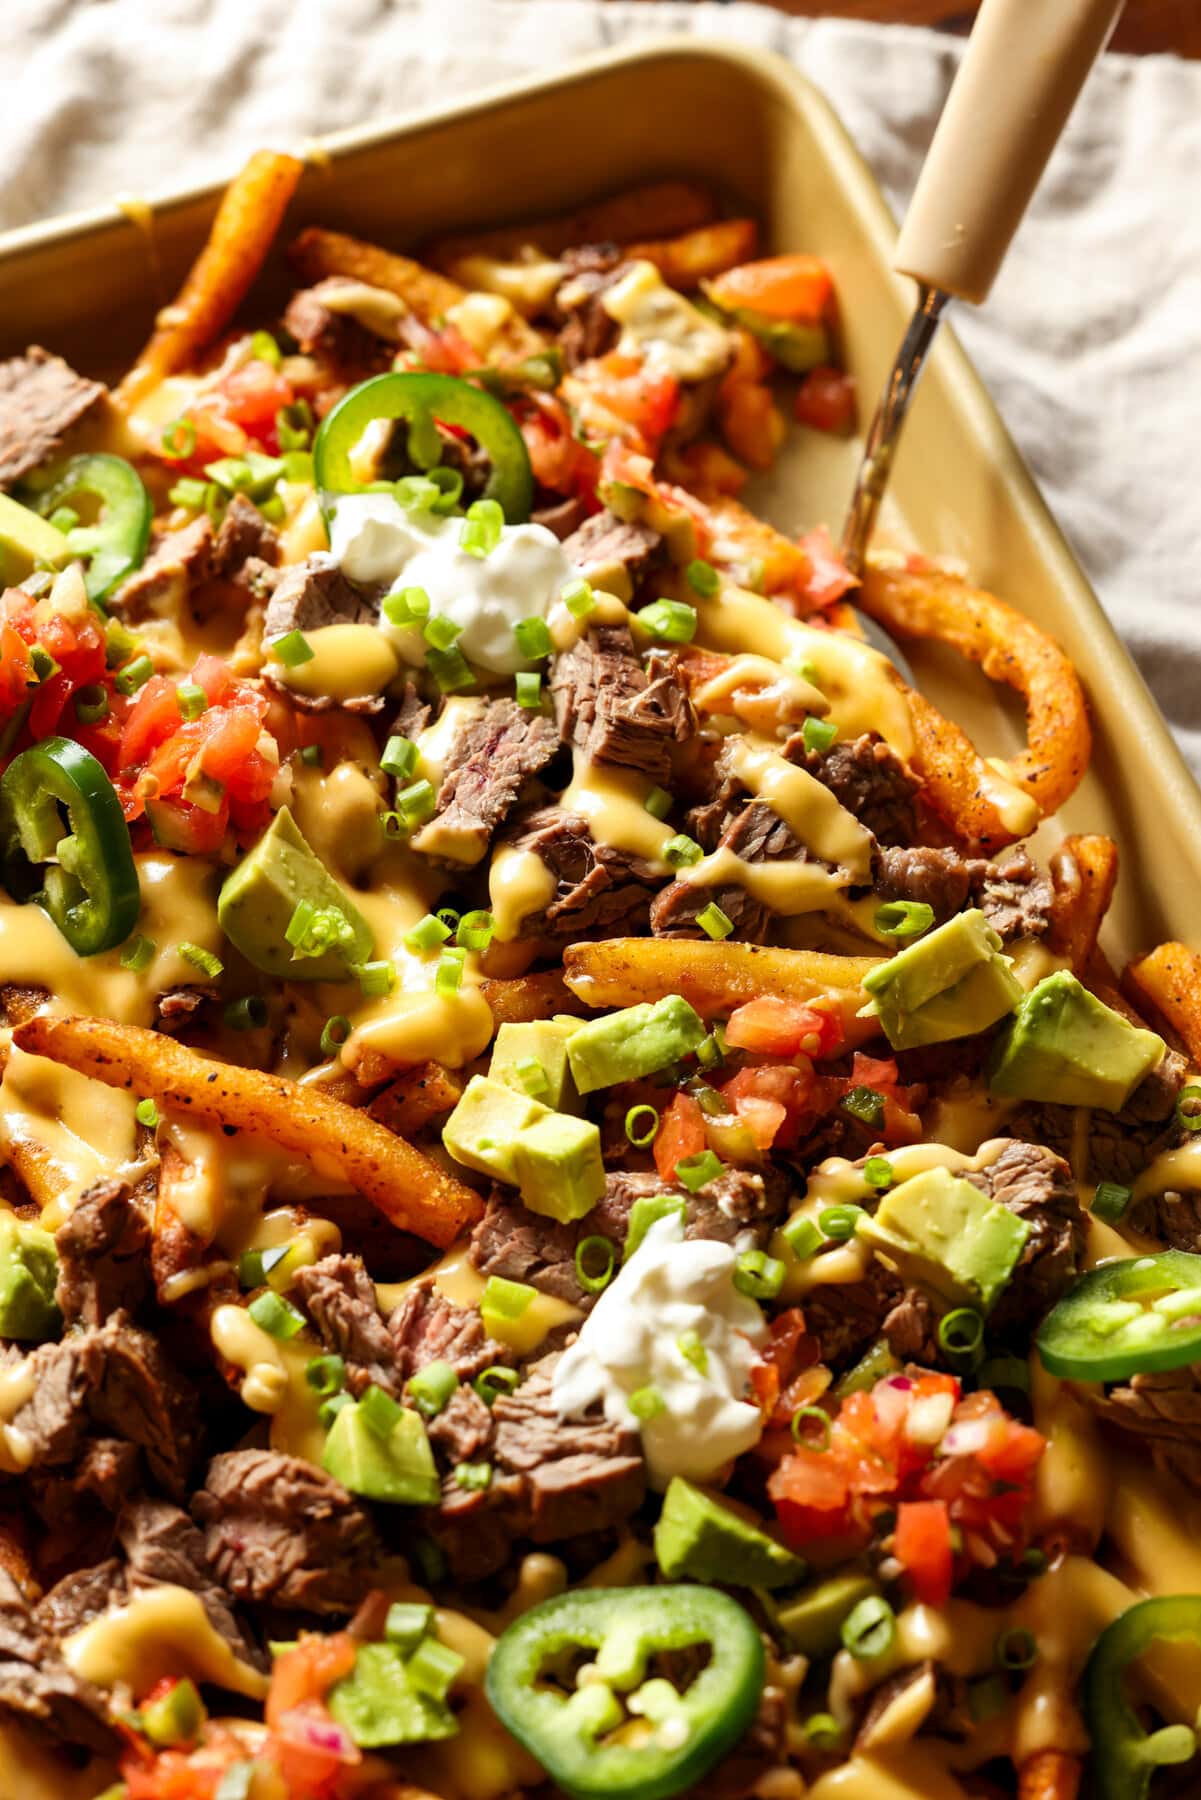 French fries topped with Carne Asada, cheese, avocado, and sour cream